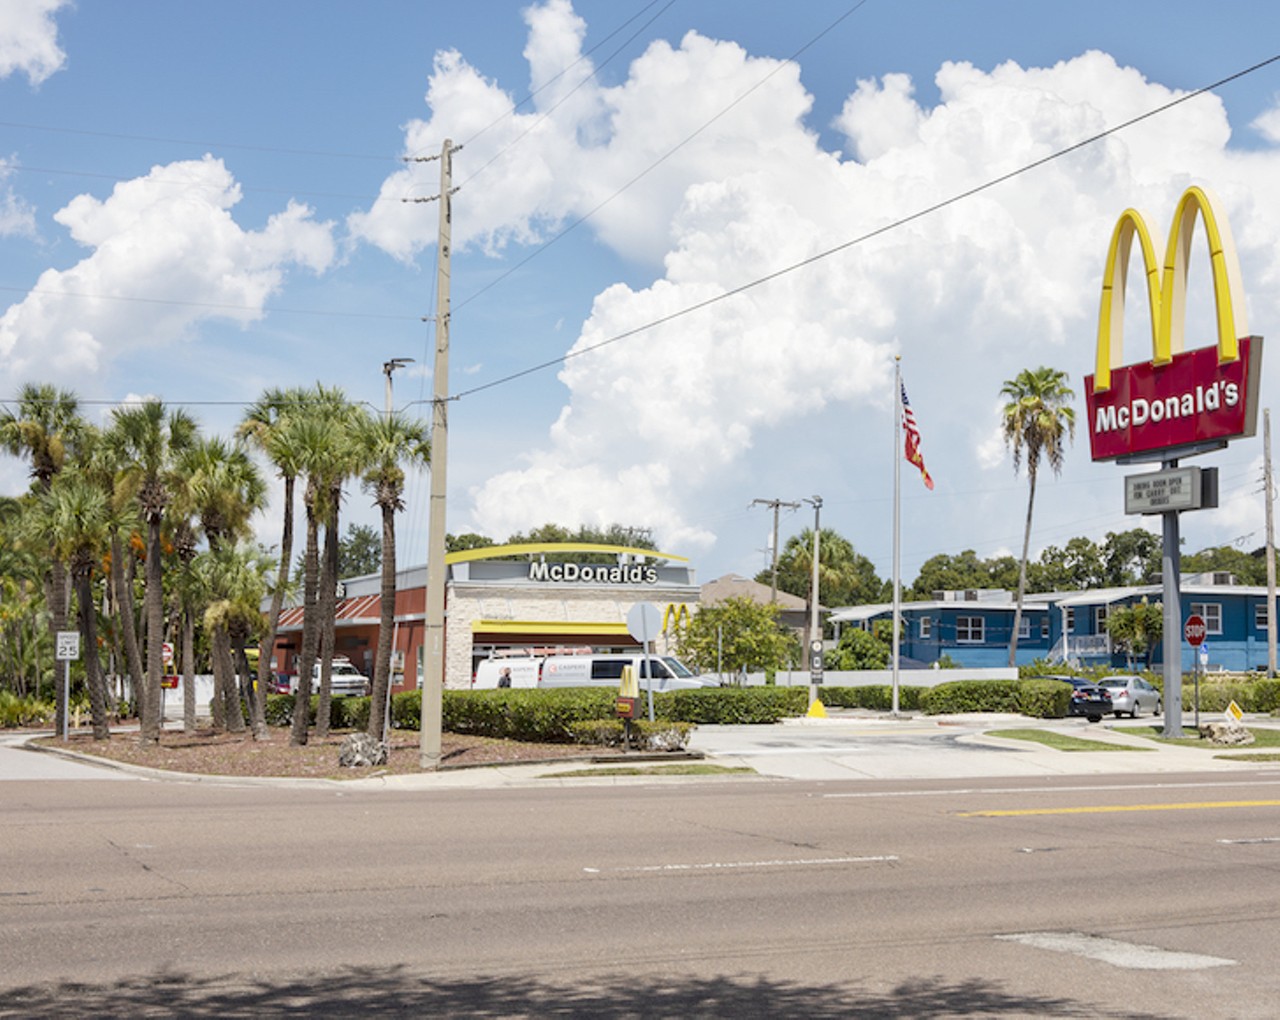 NOW
Mc Donald&#146;s 
3515 Dale Mabry Highway South, on the northwest corner of Dale Mabry Highway South and Kensington Street, 2020.
The original store was walk-up only. The dining room and drive-through were added during one of the renovations. Hamburgers, $0.15 in 1958, retail for $1.49 today